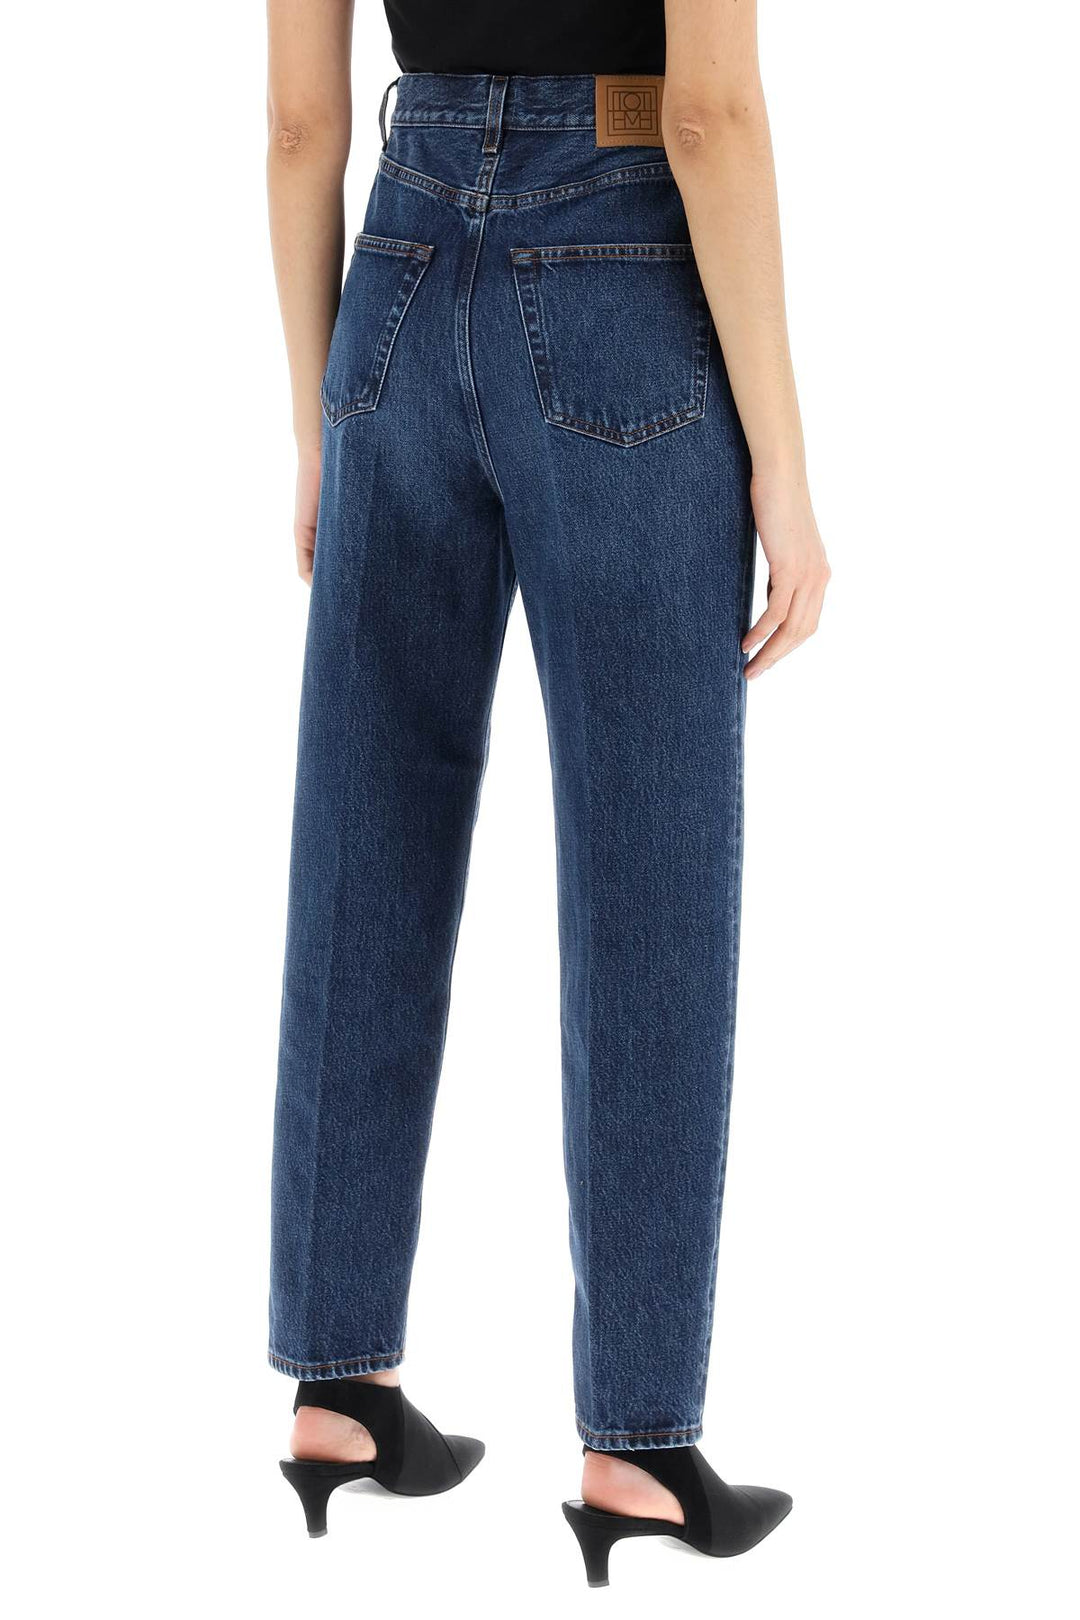 Toteme Tapered Jeans   Blue